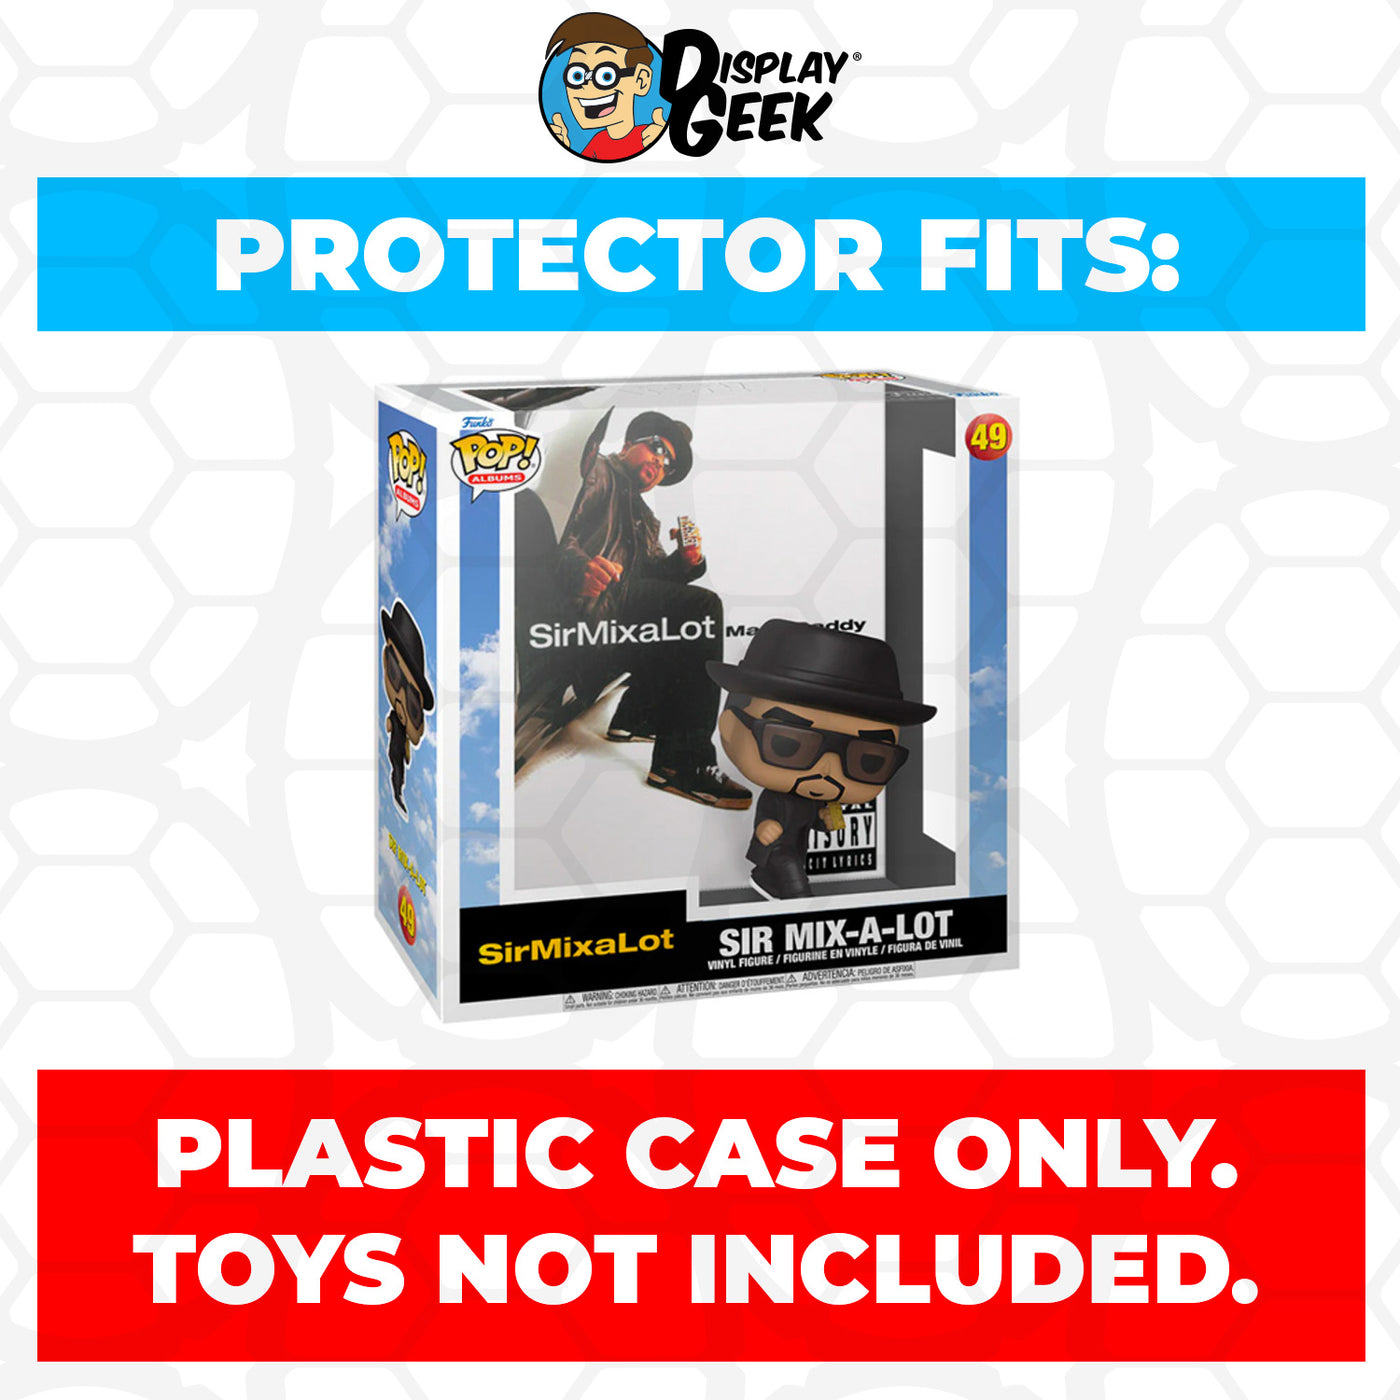 Pop Protector for Sir Mix-A-Lot Mack Daddy #49 Funko Pop Albums on The Protector Guide App by Display Geek